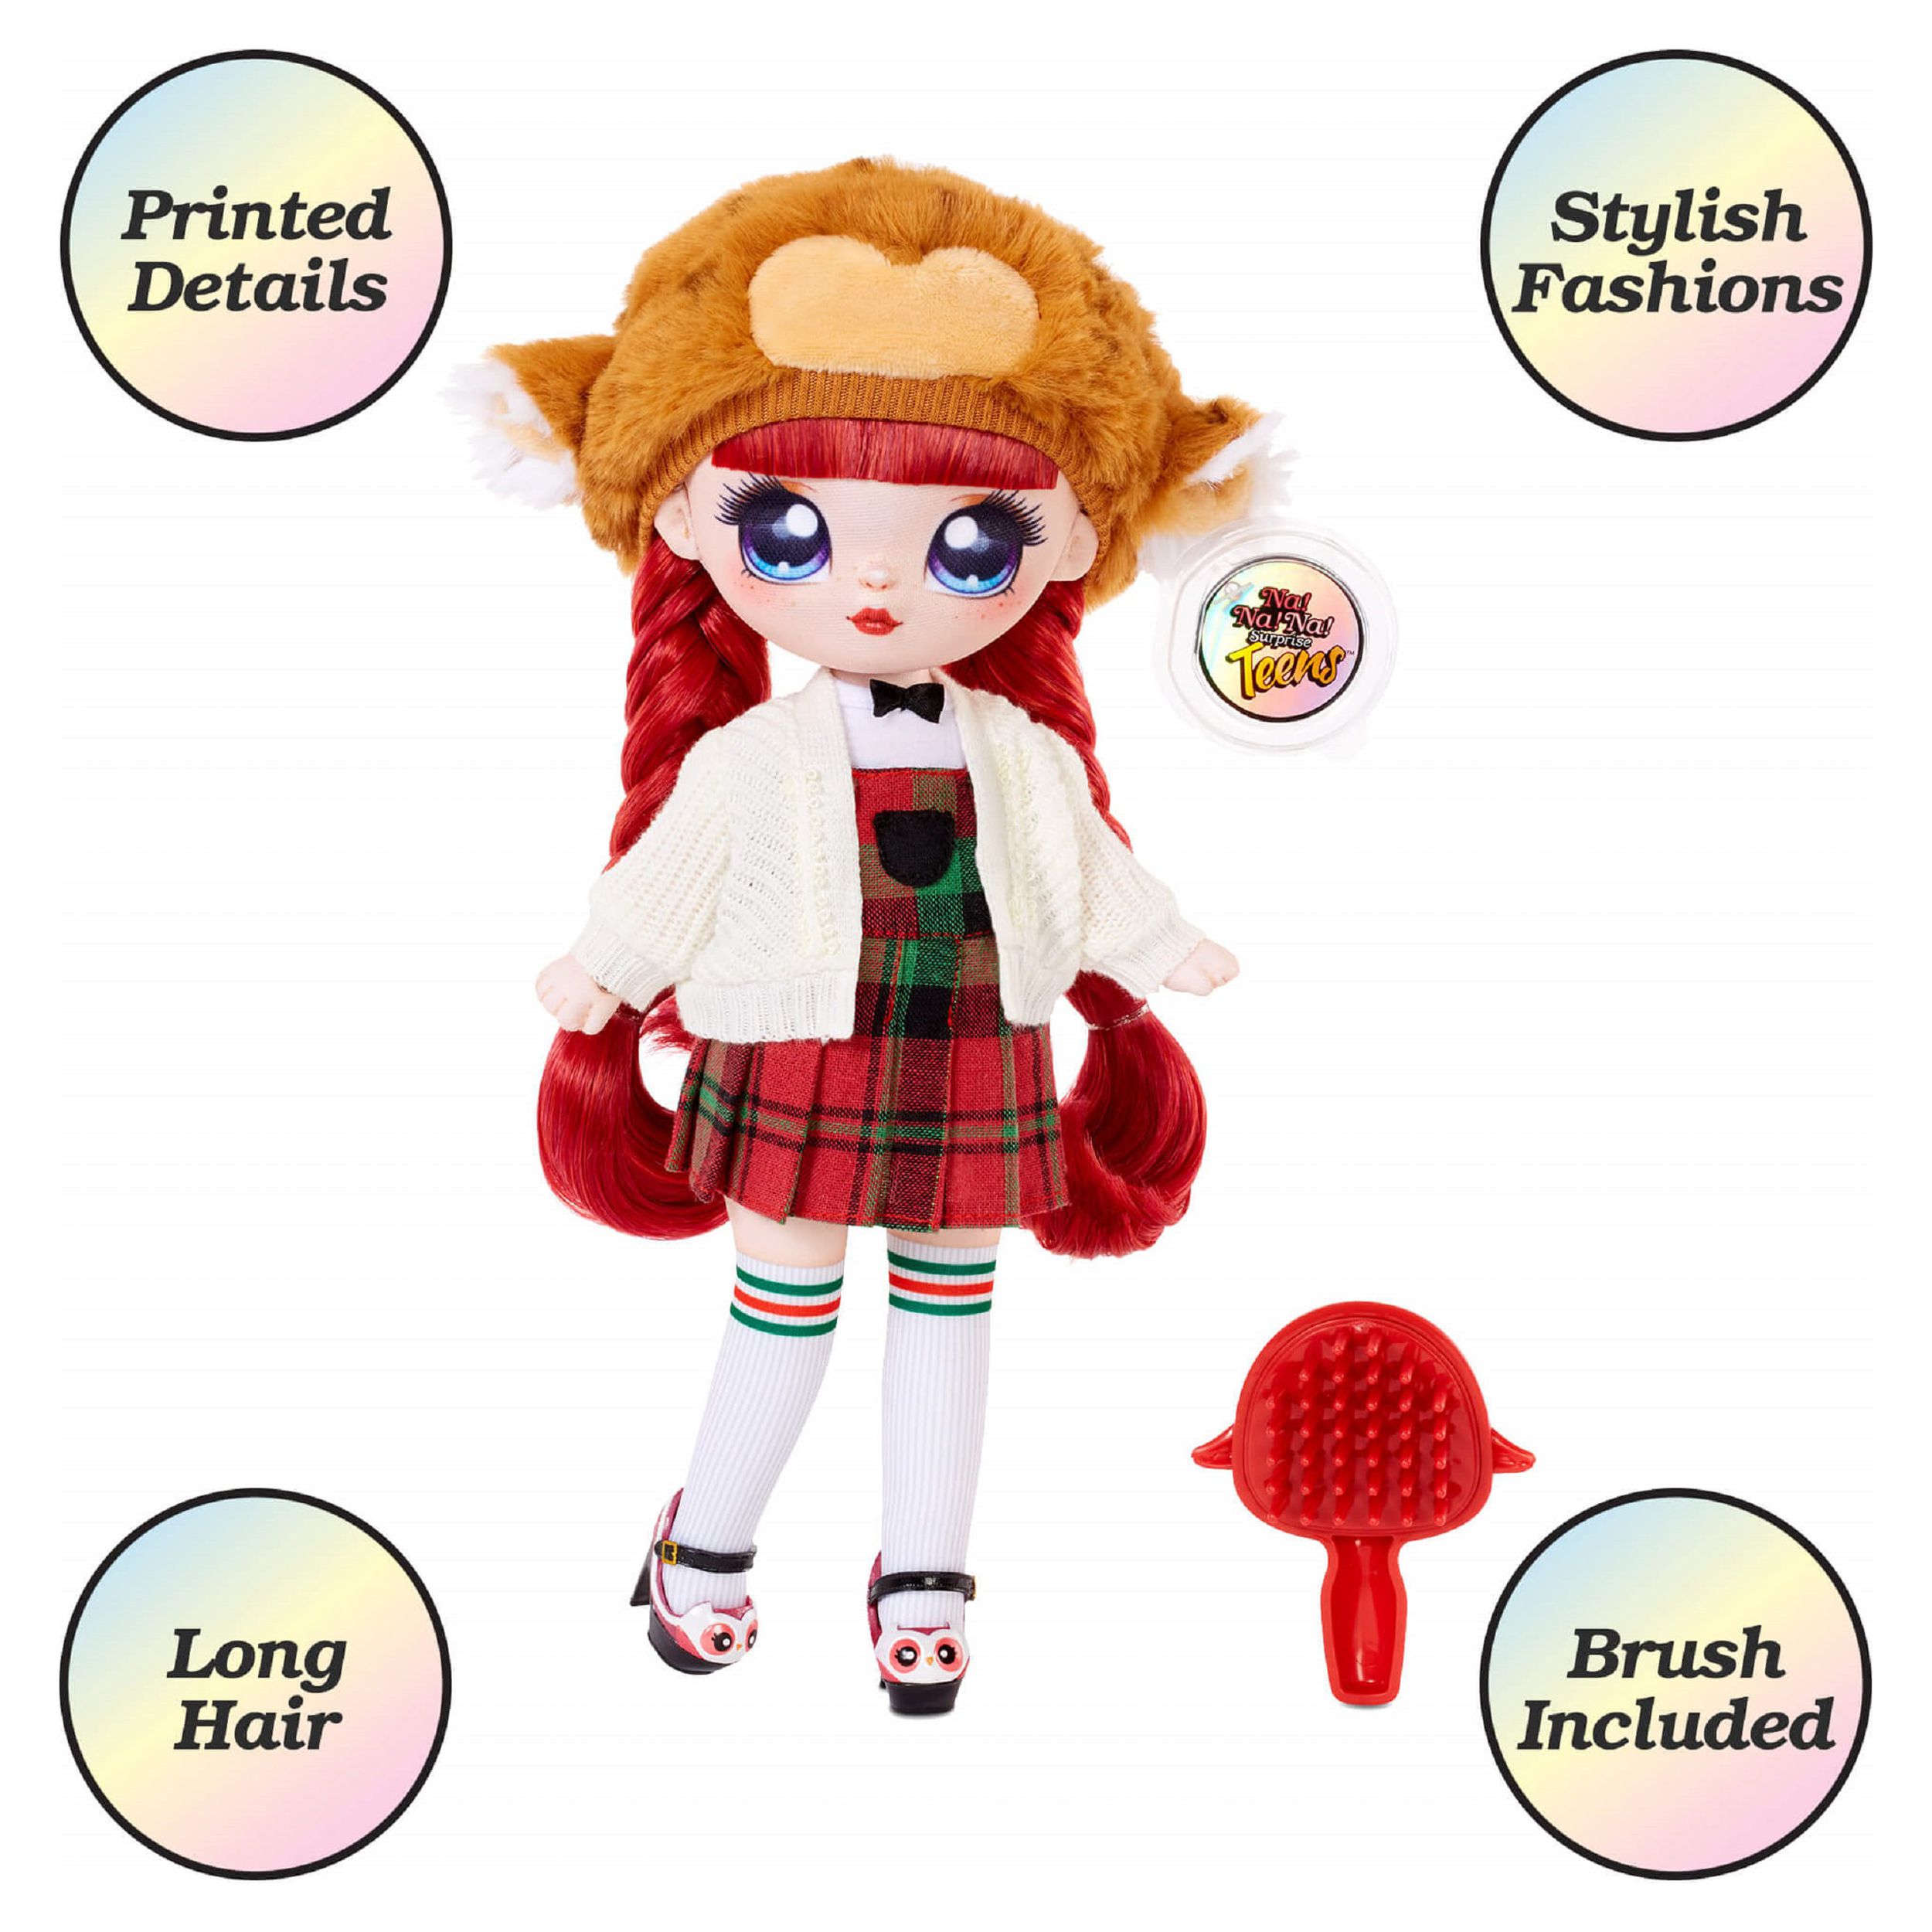 Na Na Na Surprise Teens Fashion Doll - Samantha Smartie, Owl Inspired, 11" Soft Fabric Doll - image 5 of 7